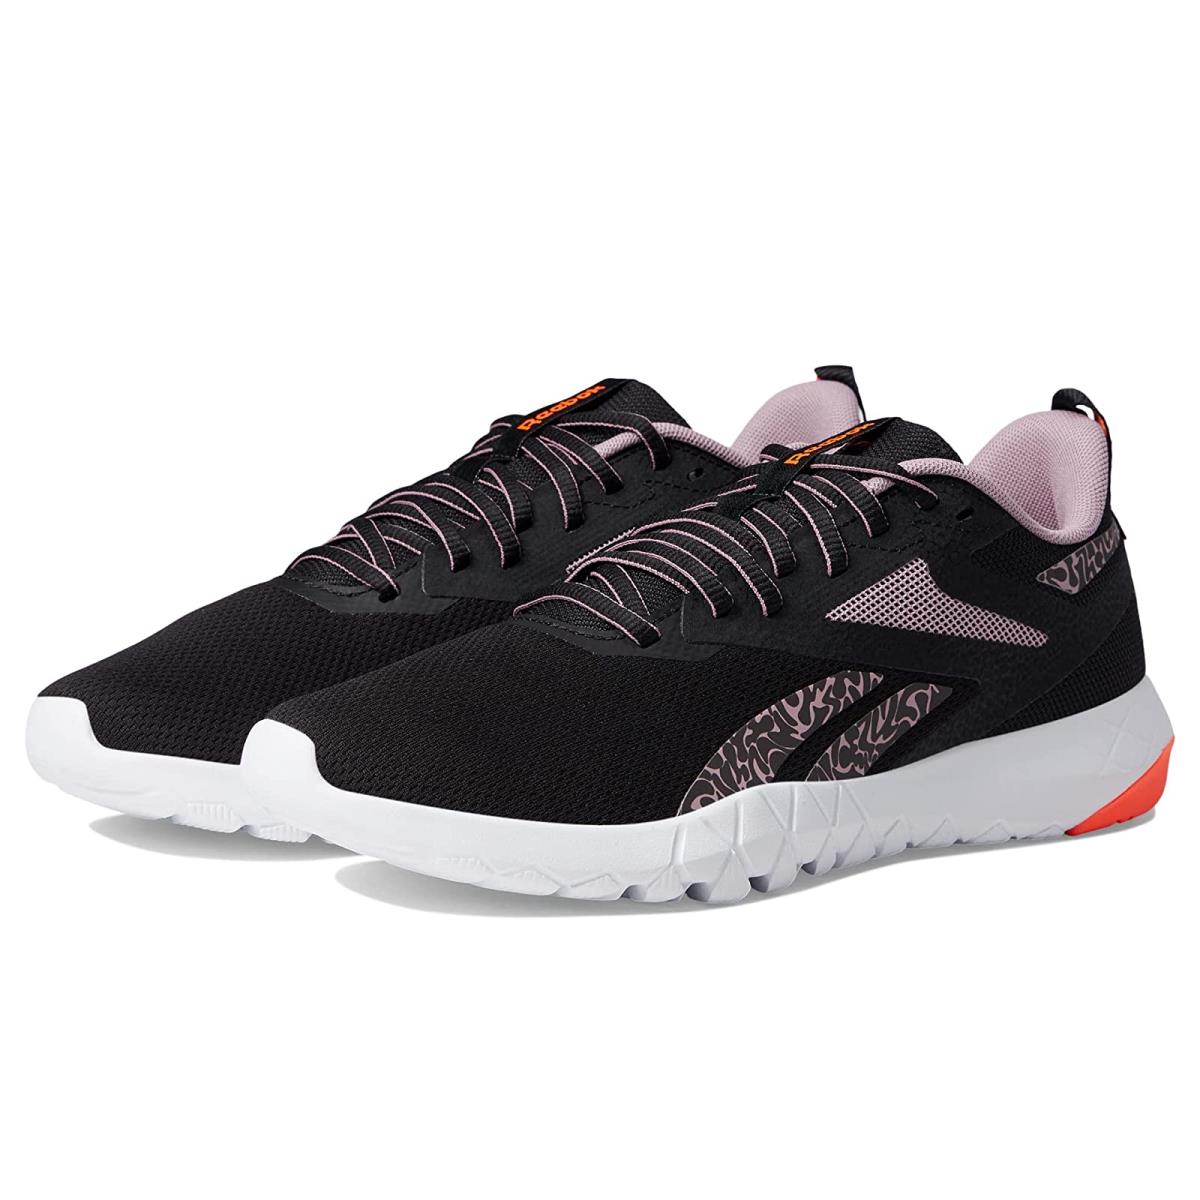 Woman`s Sneakers Athletic Shoes Reebok Flexagon Force 4.0 Black/Infused Lilac/Orange Flare